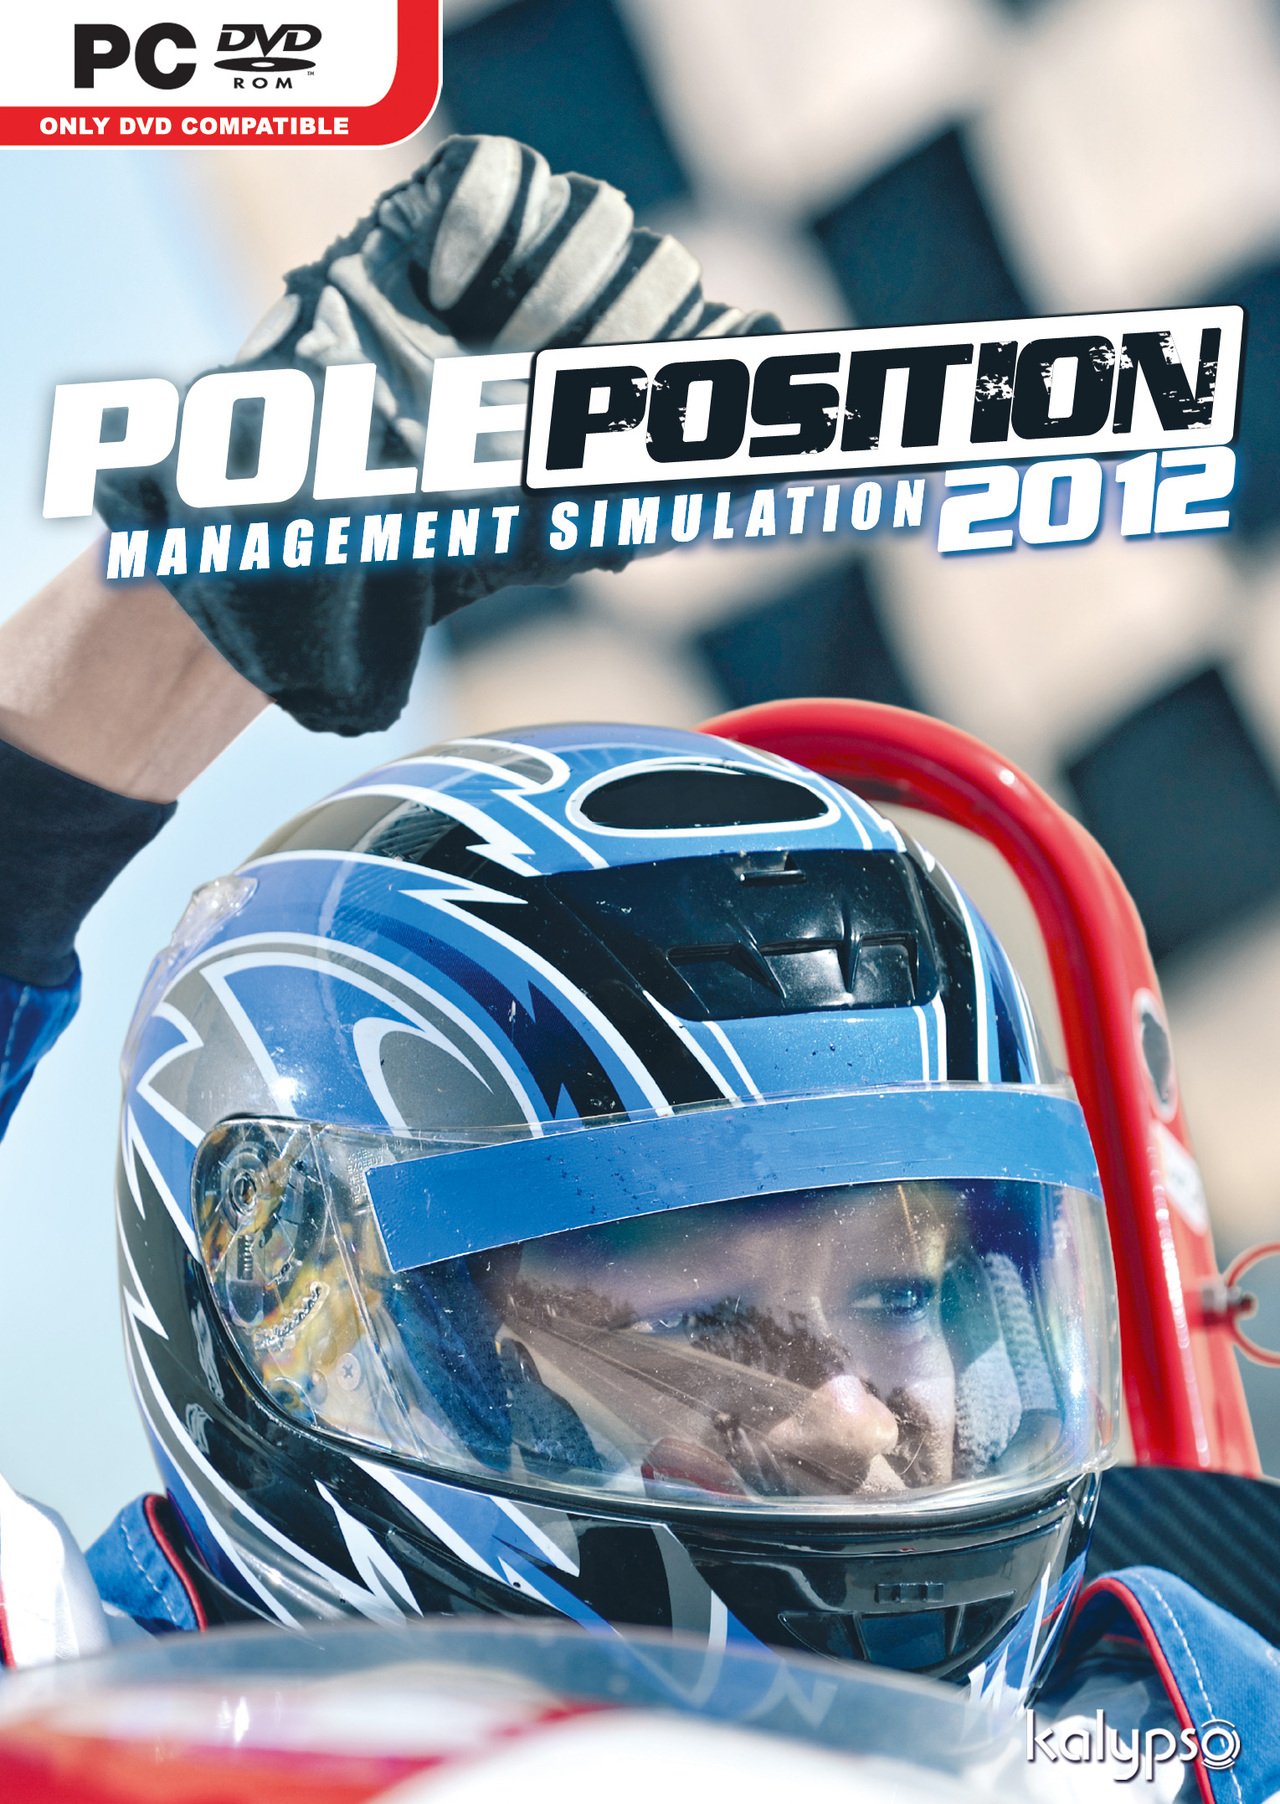 Image of Pole Position 2012